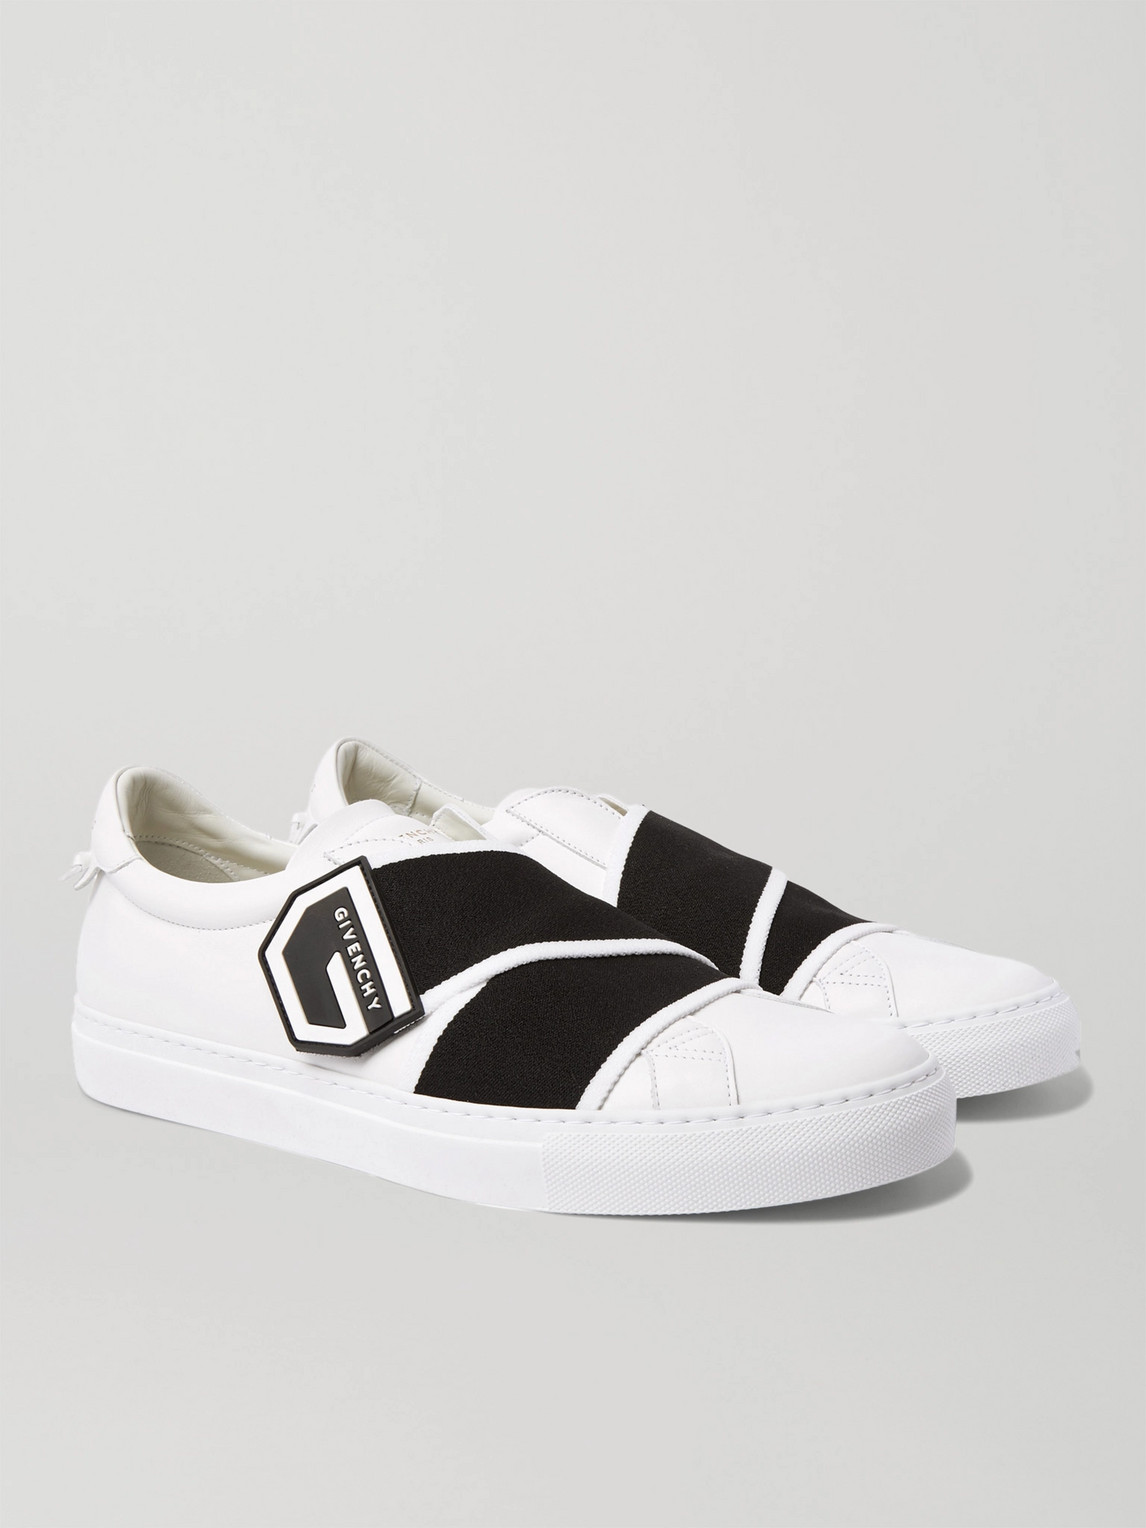 GIVENCHY URBAN STREET LOGO-PRINT LEATHER SNEAKERS